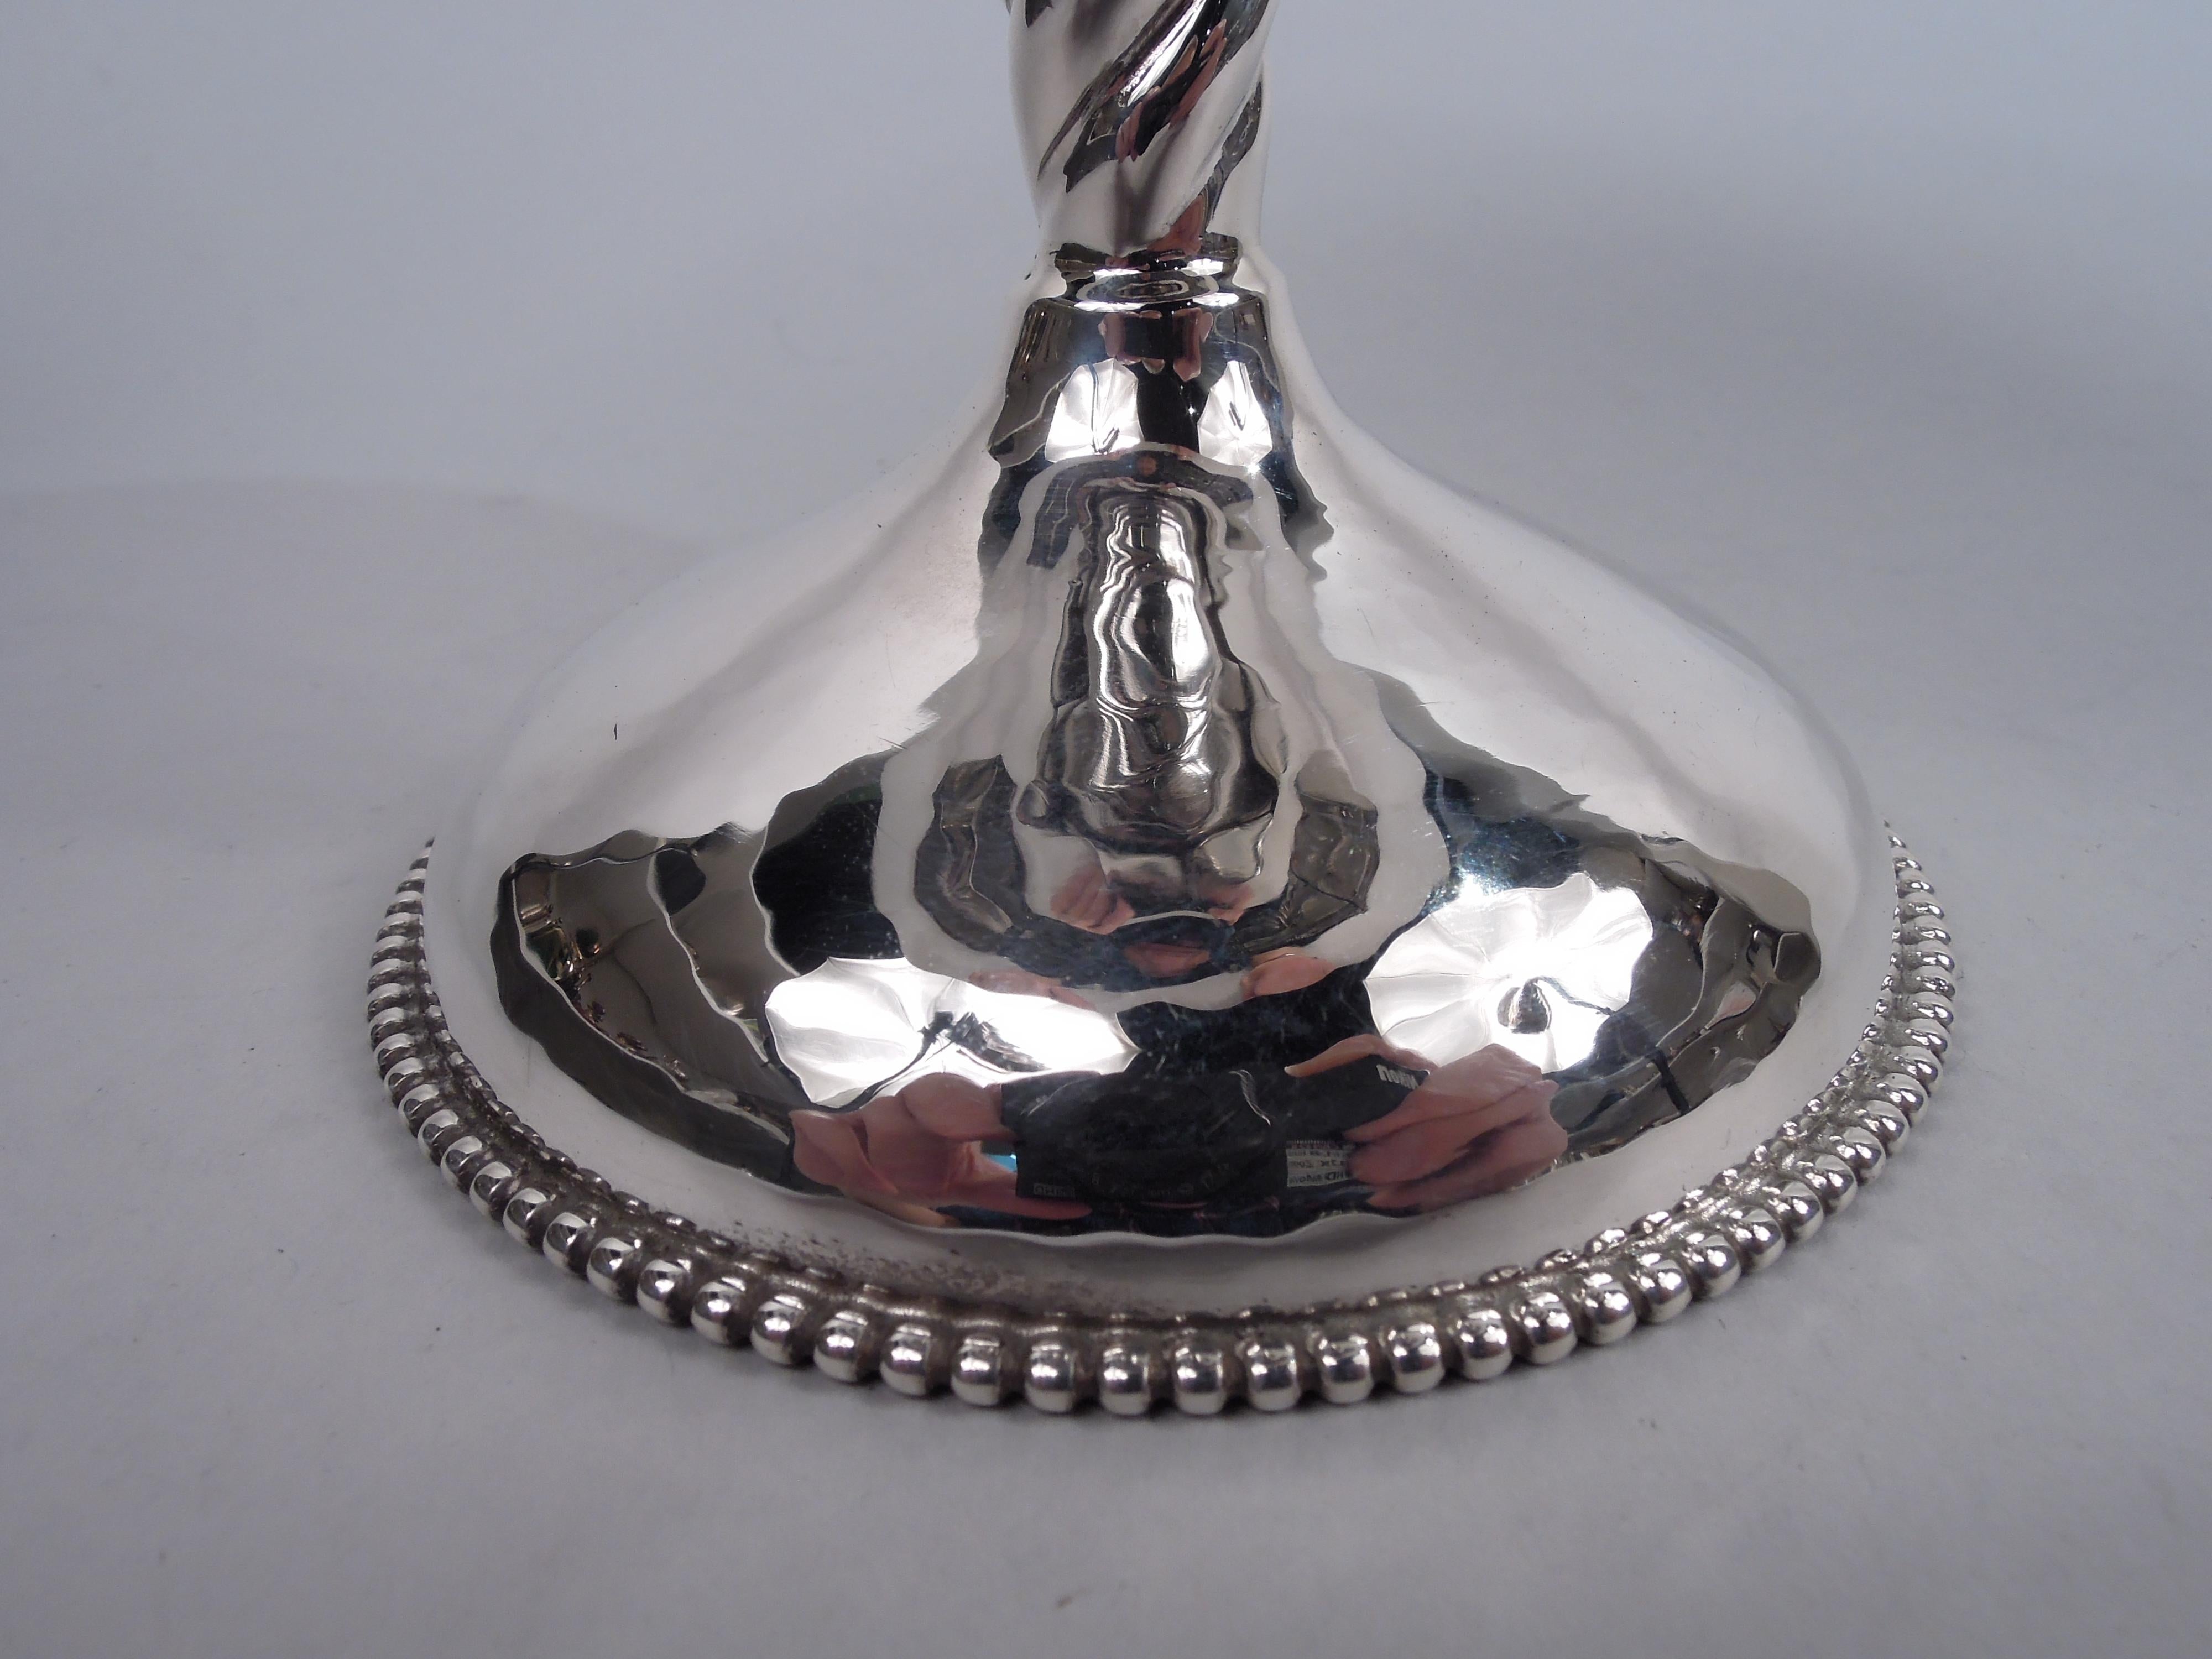 20th Century DeMatteo Midcentury Modern Sterling Silver Compote For Sale